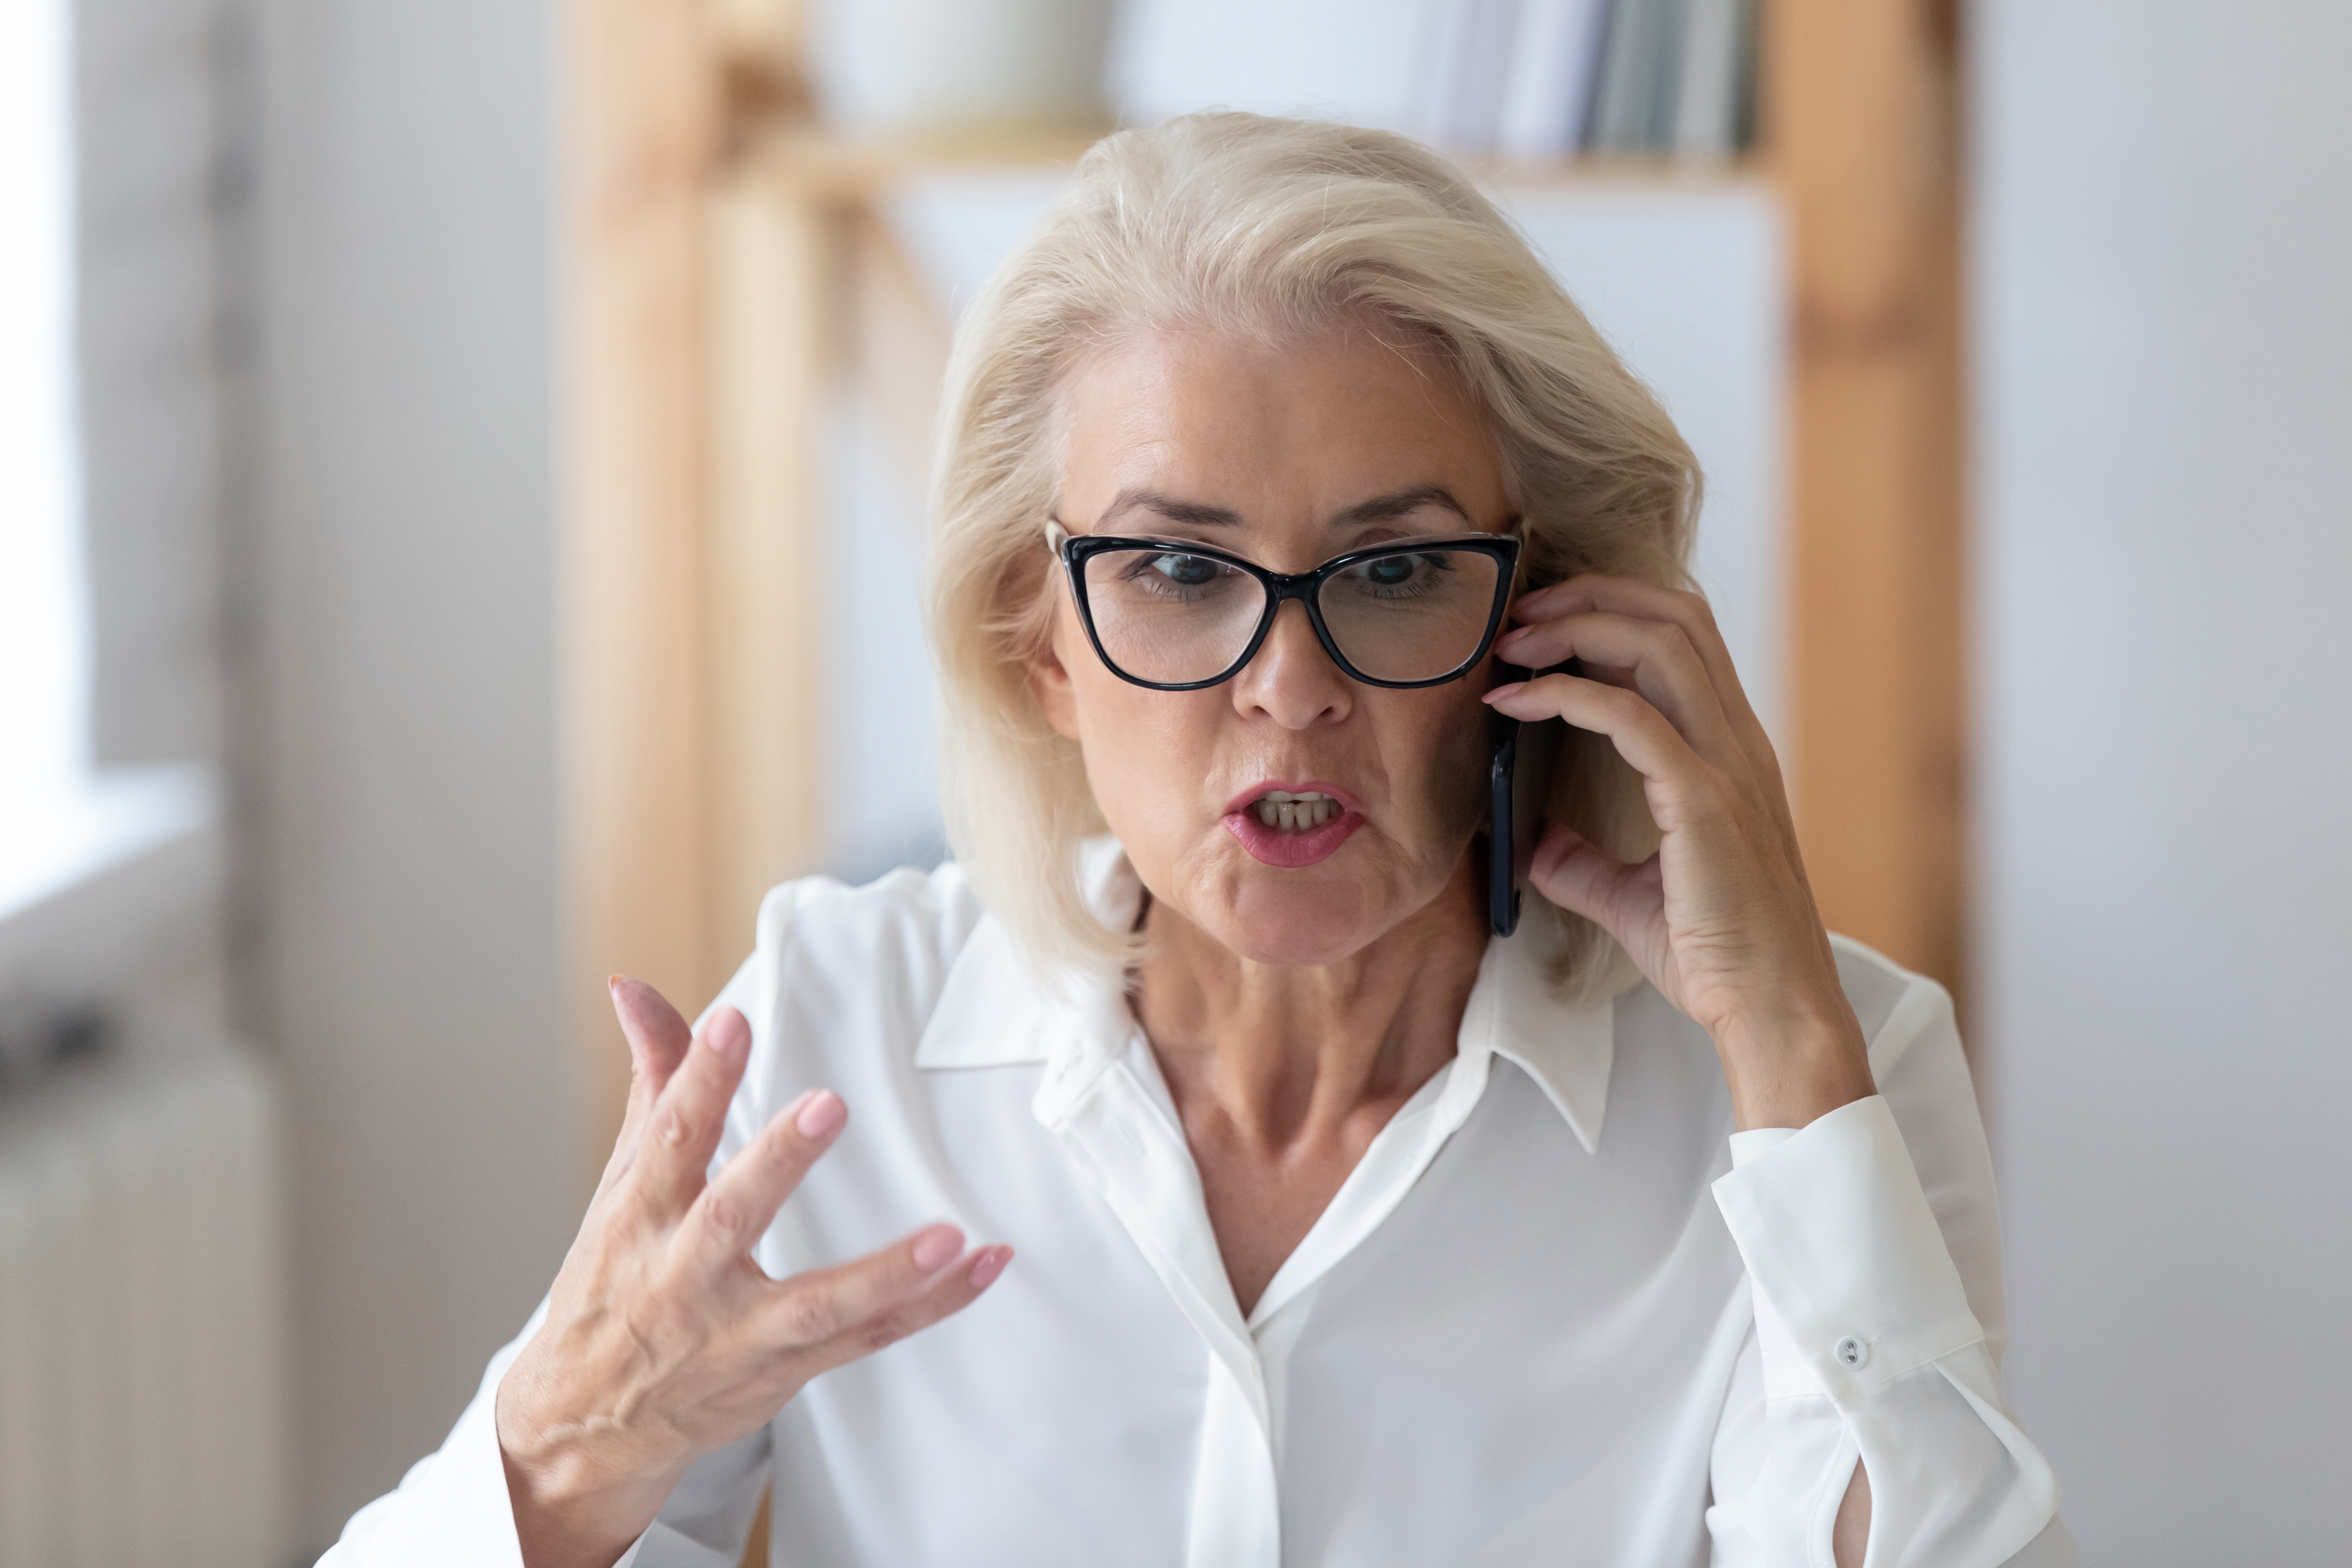 Frustrated woman on the phone | Source: Shutterstock